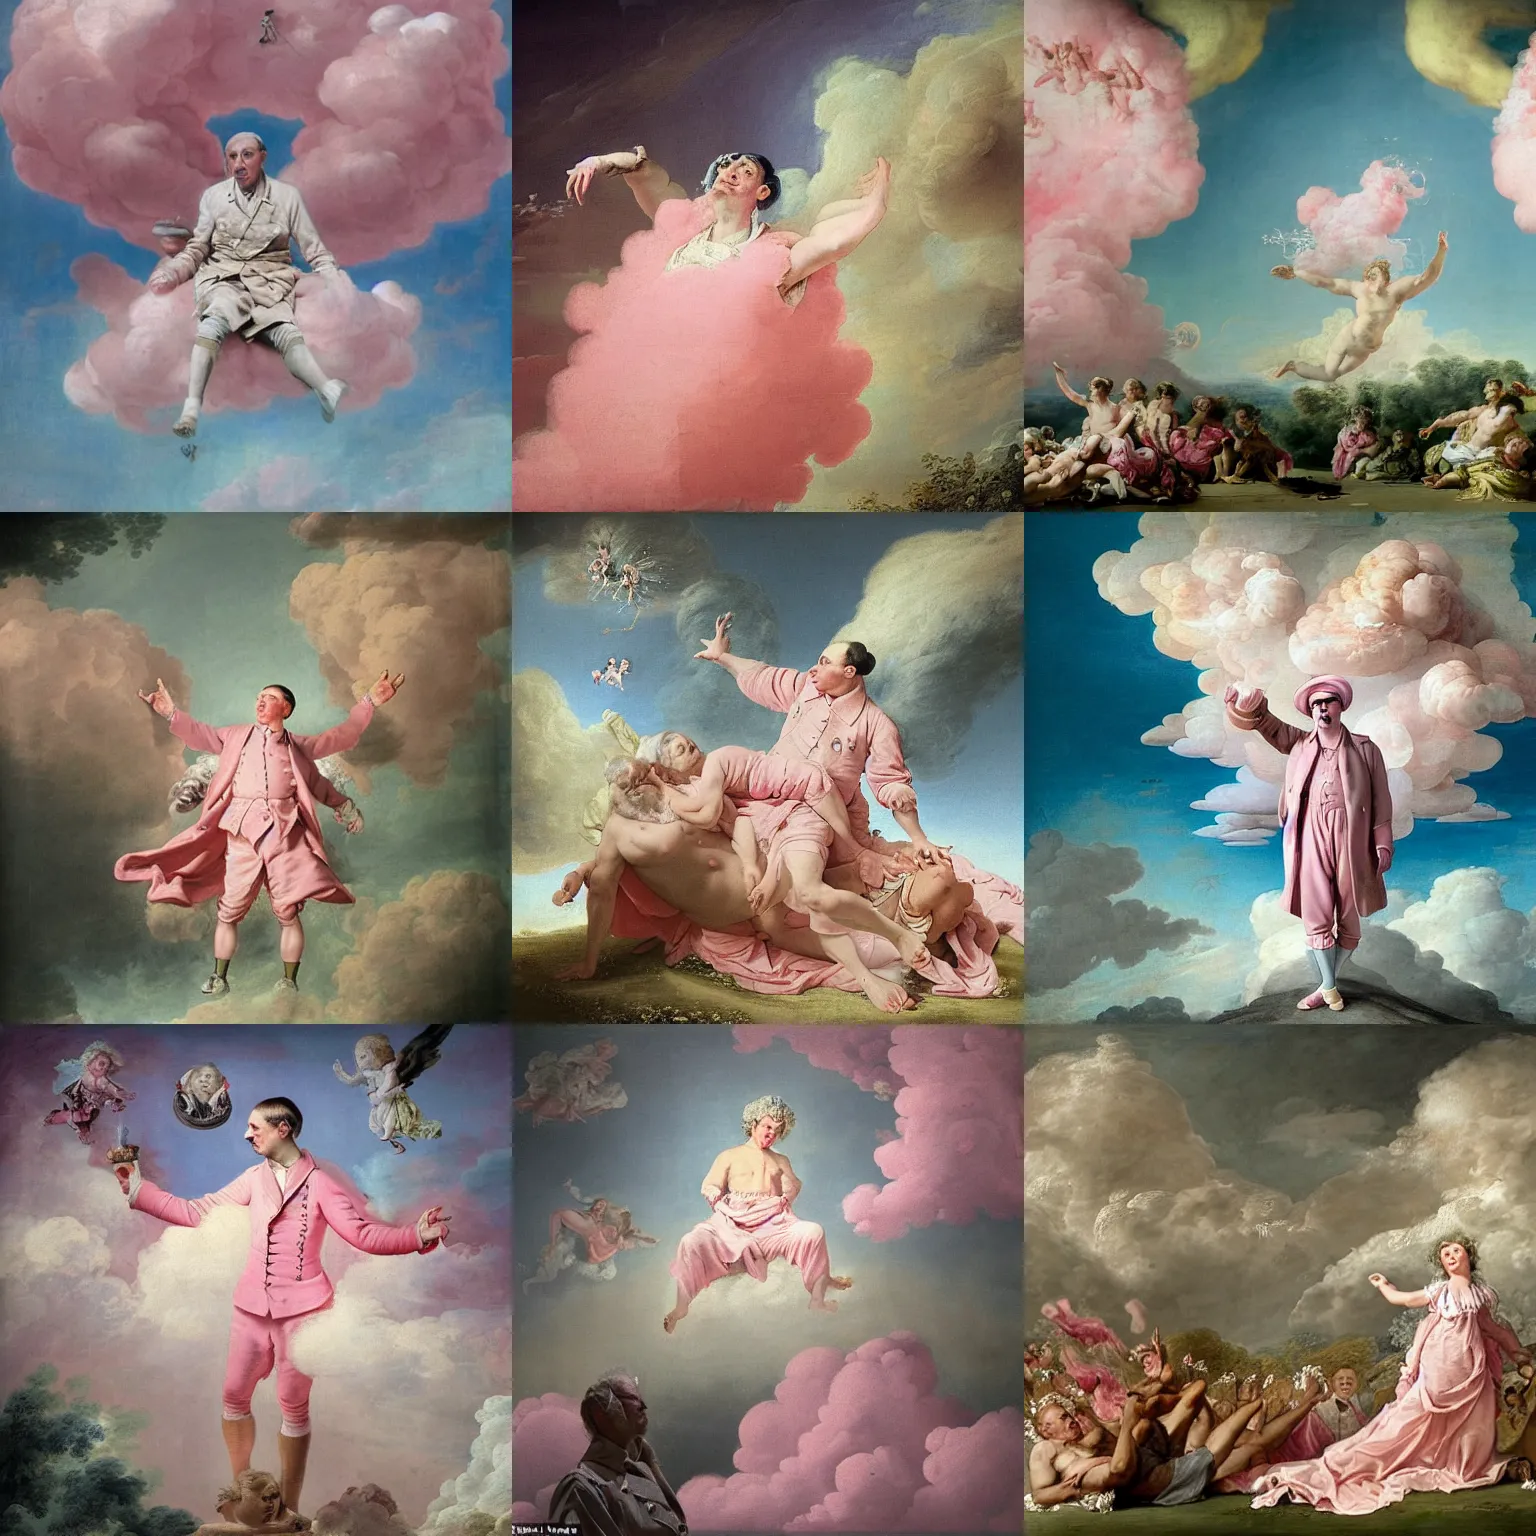 Prompt: Hitler in heaven on pink clouds adopts the language of Rococo, reimagining the dynamism of works by eighteenth-century artists such as Giovanni Battista Tiepolo, François Boucher, Nicolas Lancret and Jean-Antoine Watteau through a filter of contemporary cultural references including film, food and consumerism